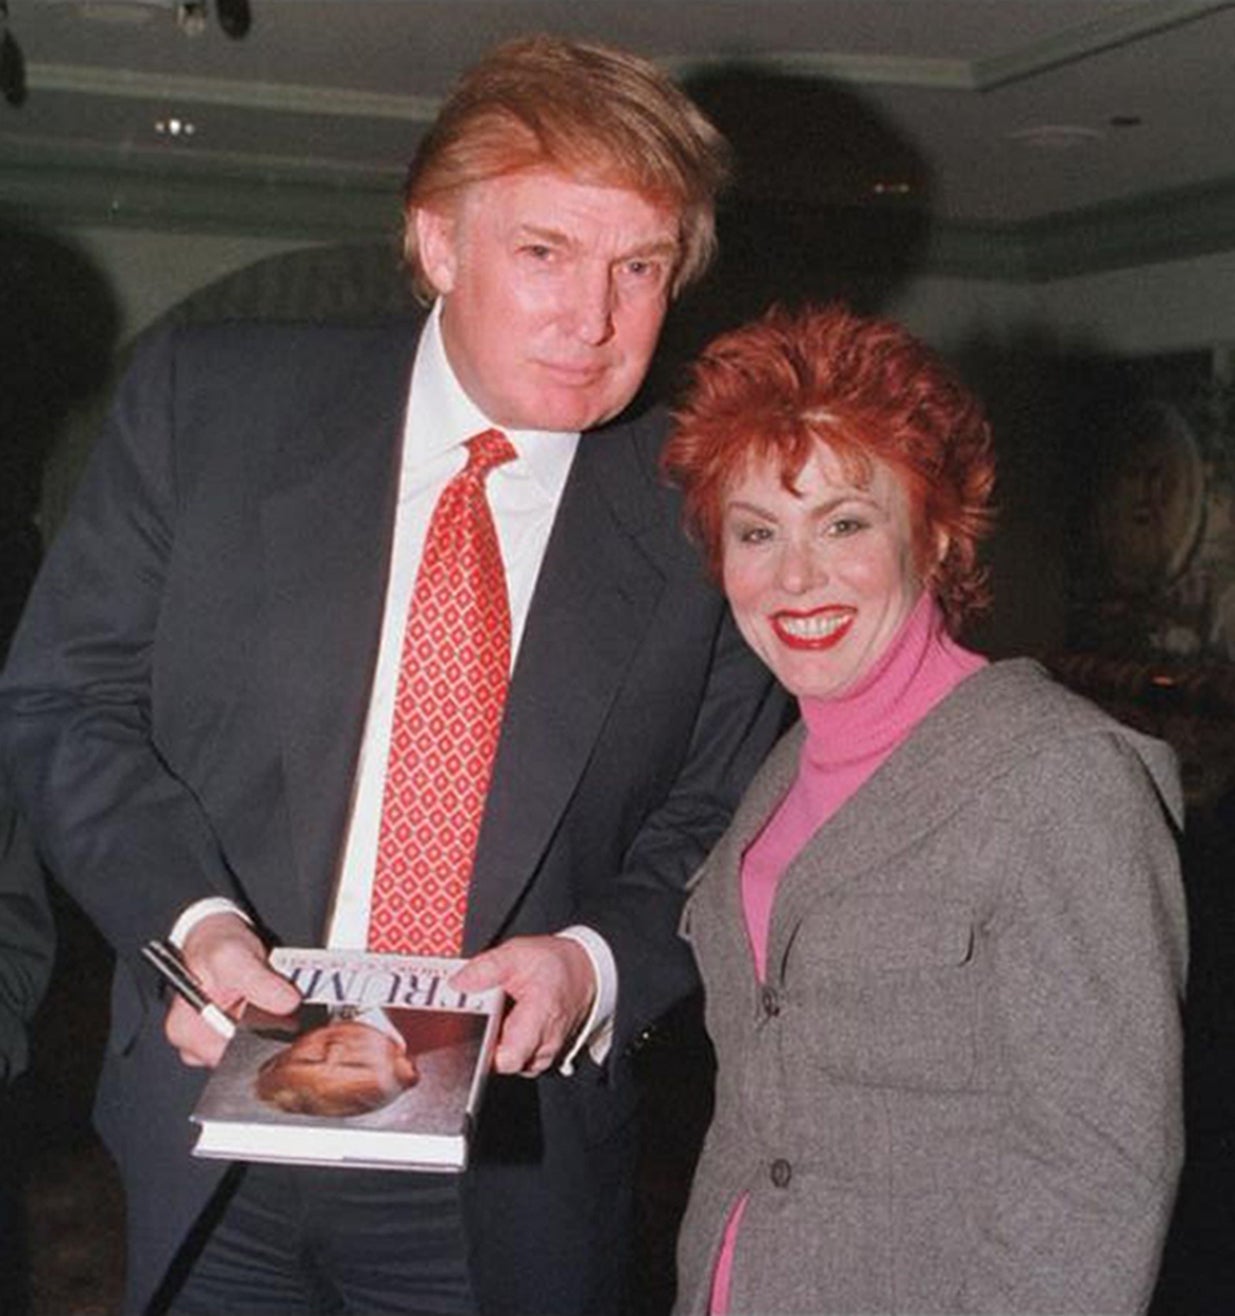 Donald Trump and Ruby Wax in 1996